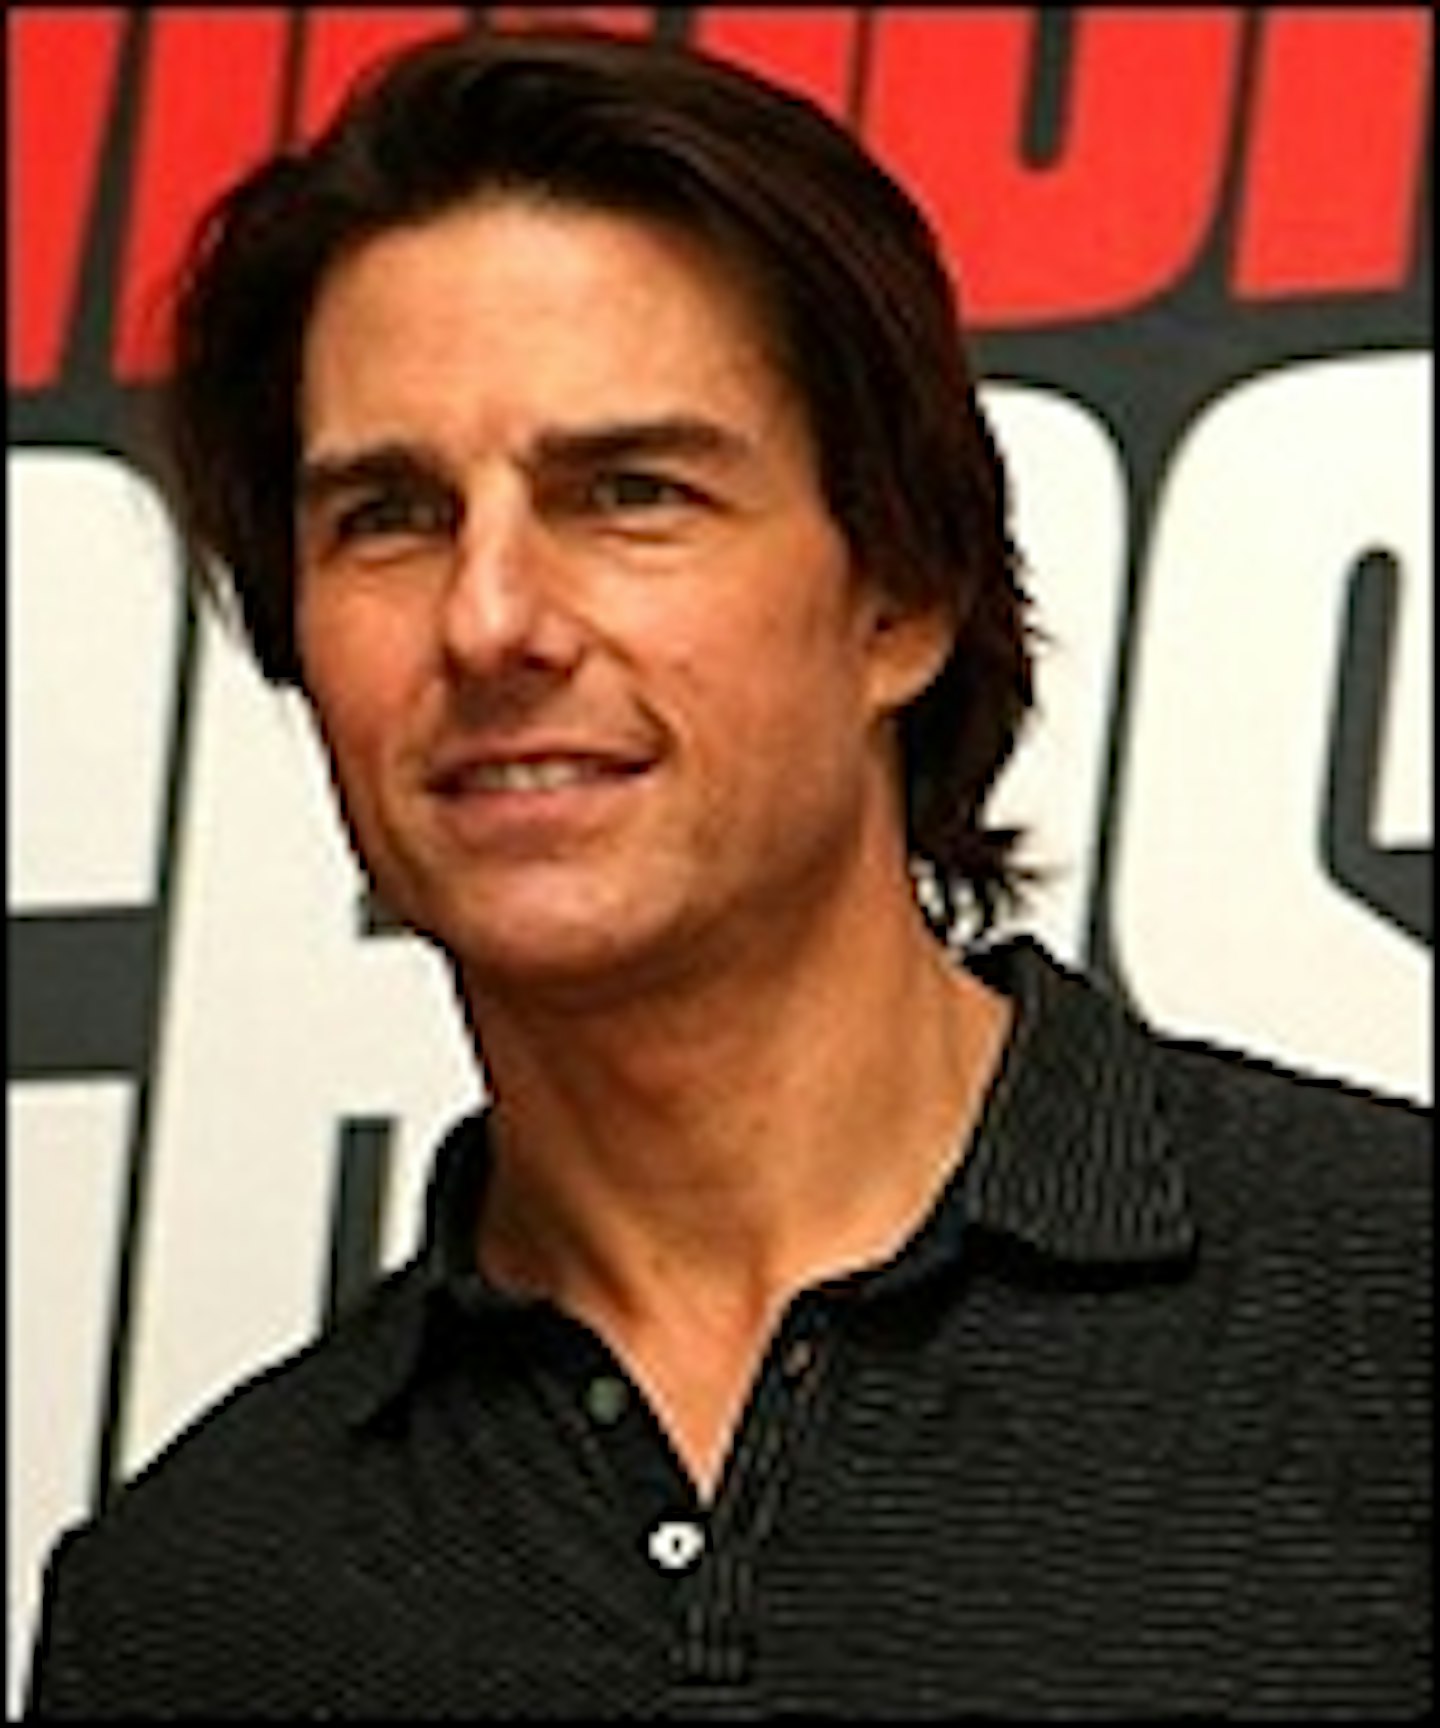 All Tom Cruise Needs Is Kill